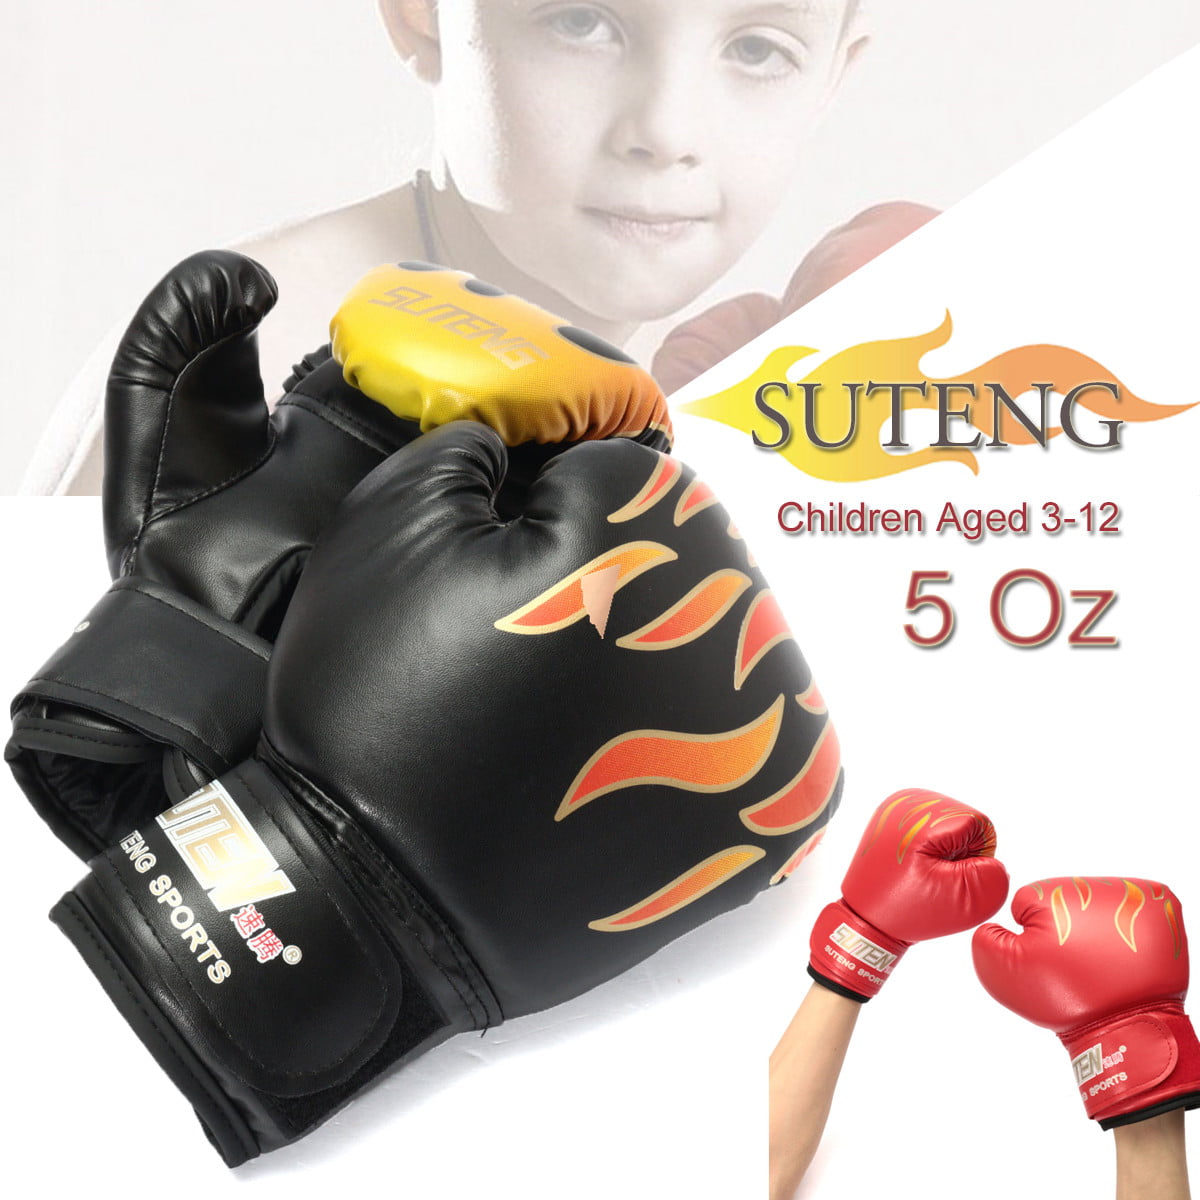 Kids Boxing Punch Bag with Hand Wraps Skipping Rope 6oz Junior Gloves & Chain 